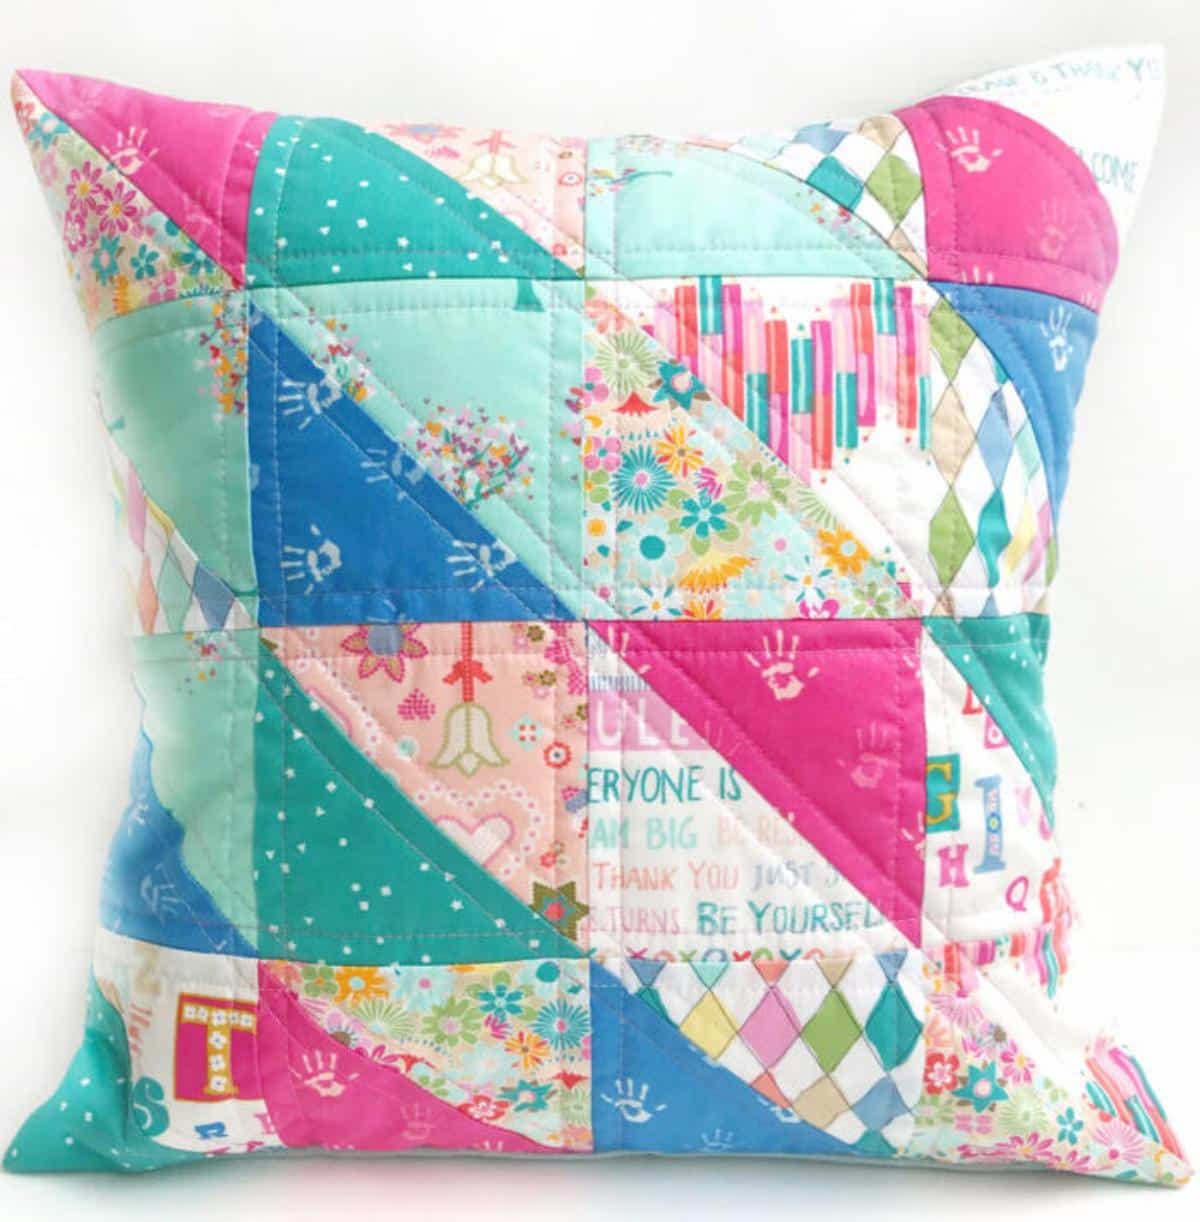 Quilted Pillow Using Half-Square Triangles